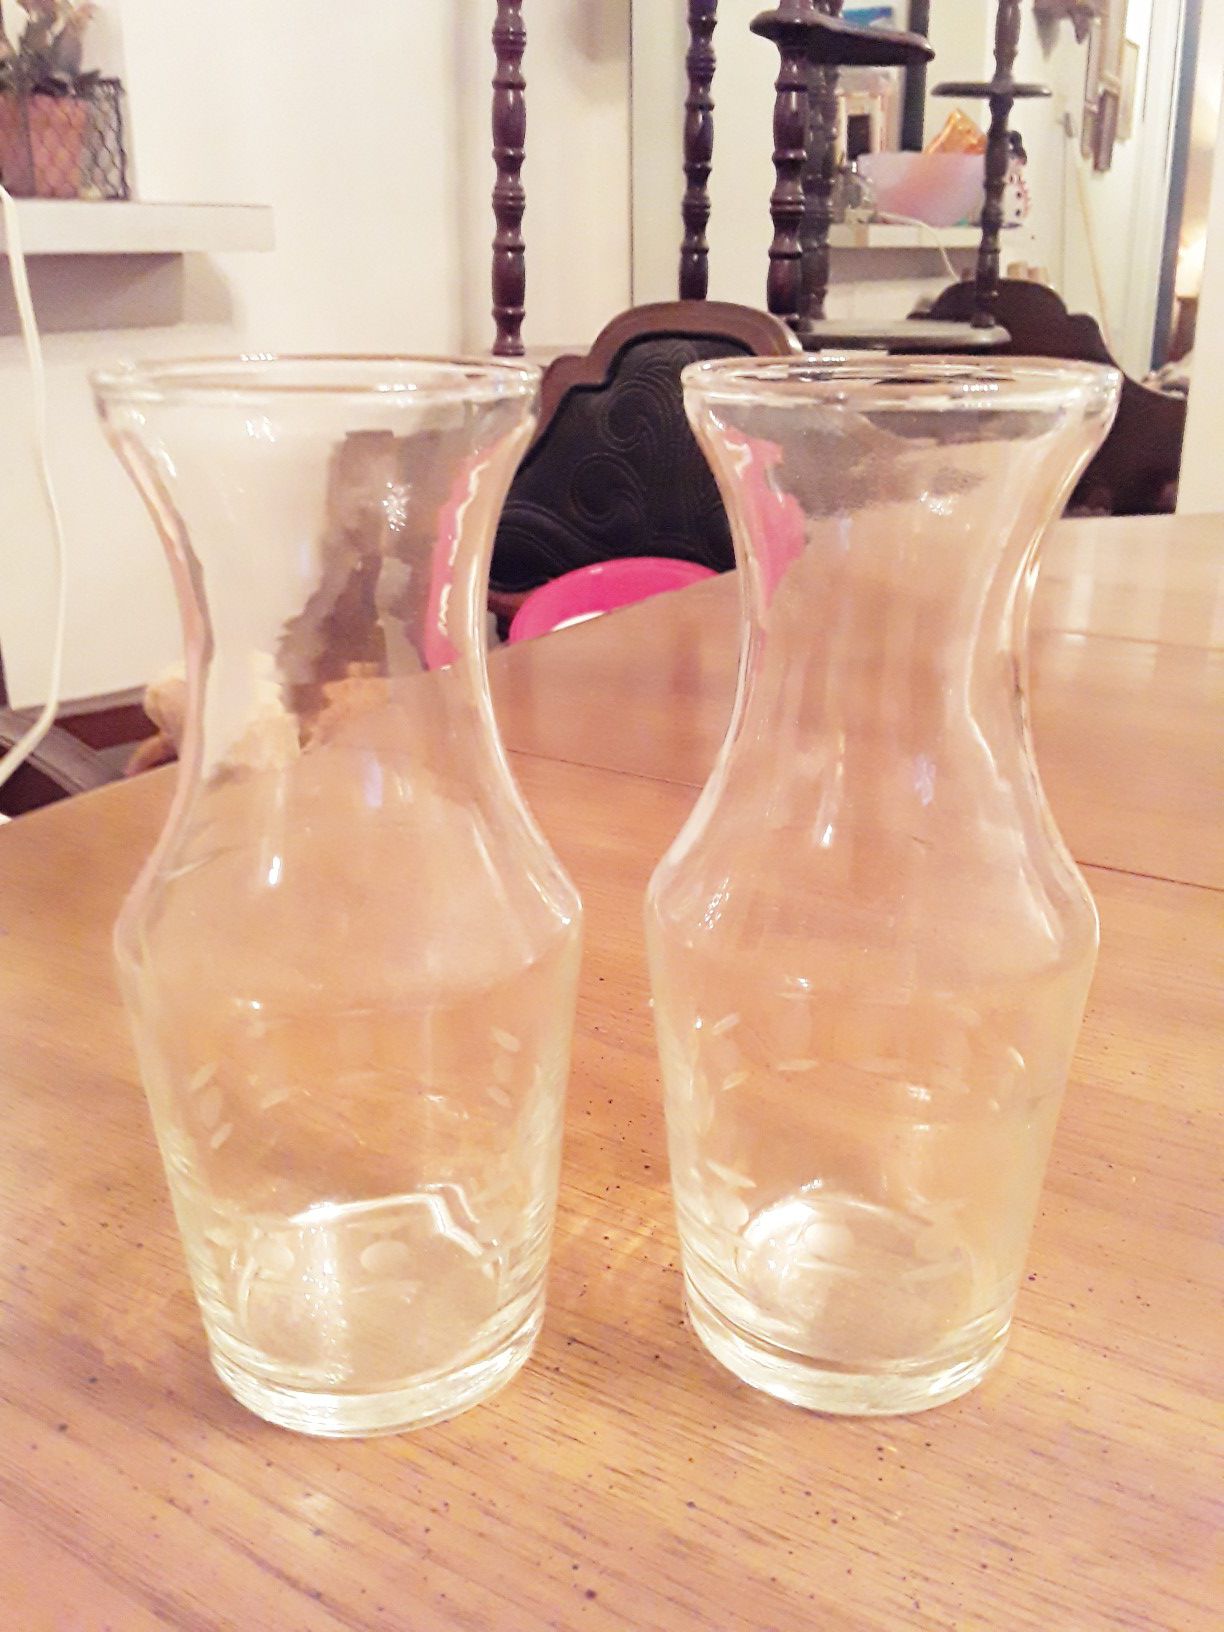 Pair Of Beautifully Etched Personal Carafes - 6 1/2"H - Both For $8 Or $5 Each